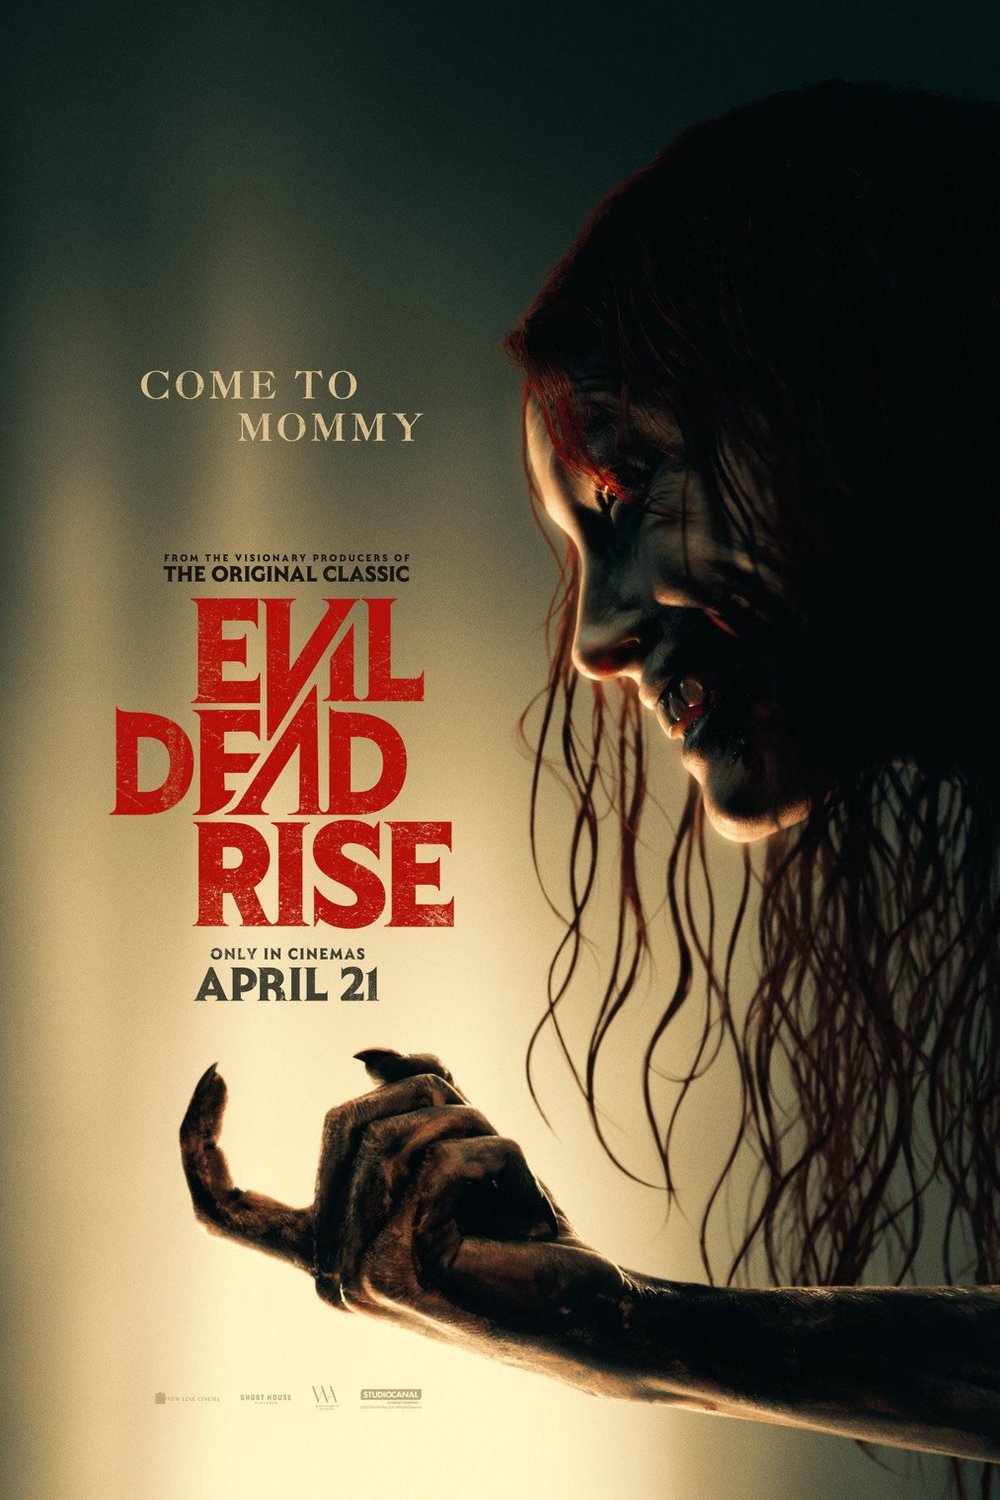 Poster of the movie Evil Dead Rise